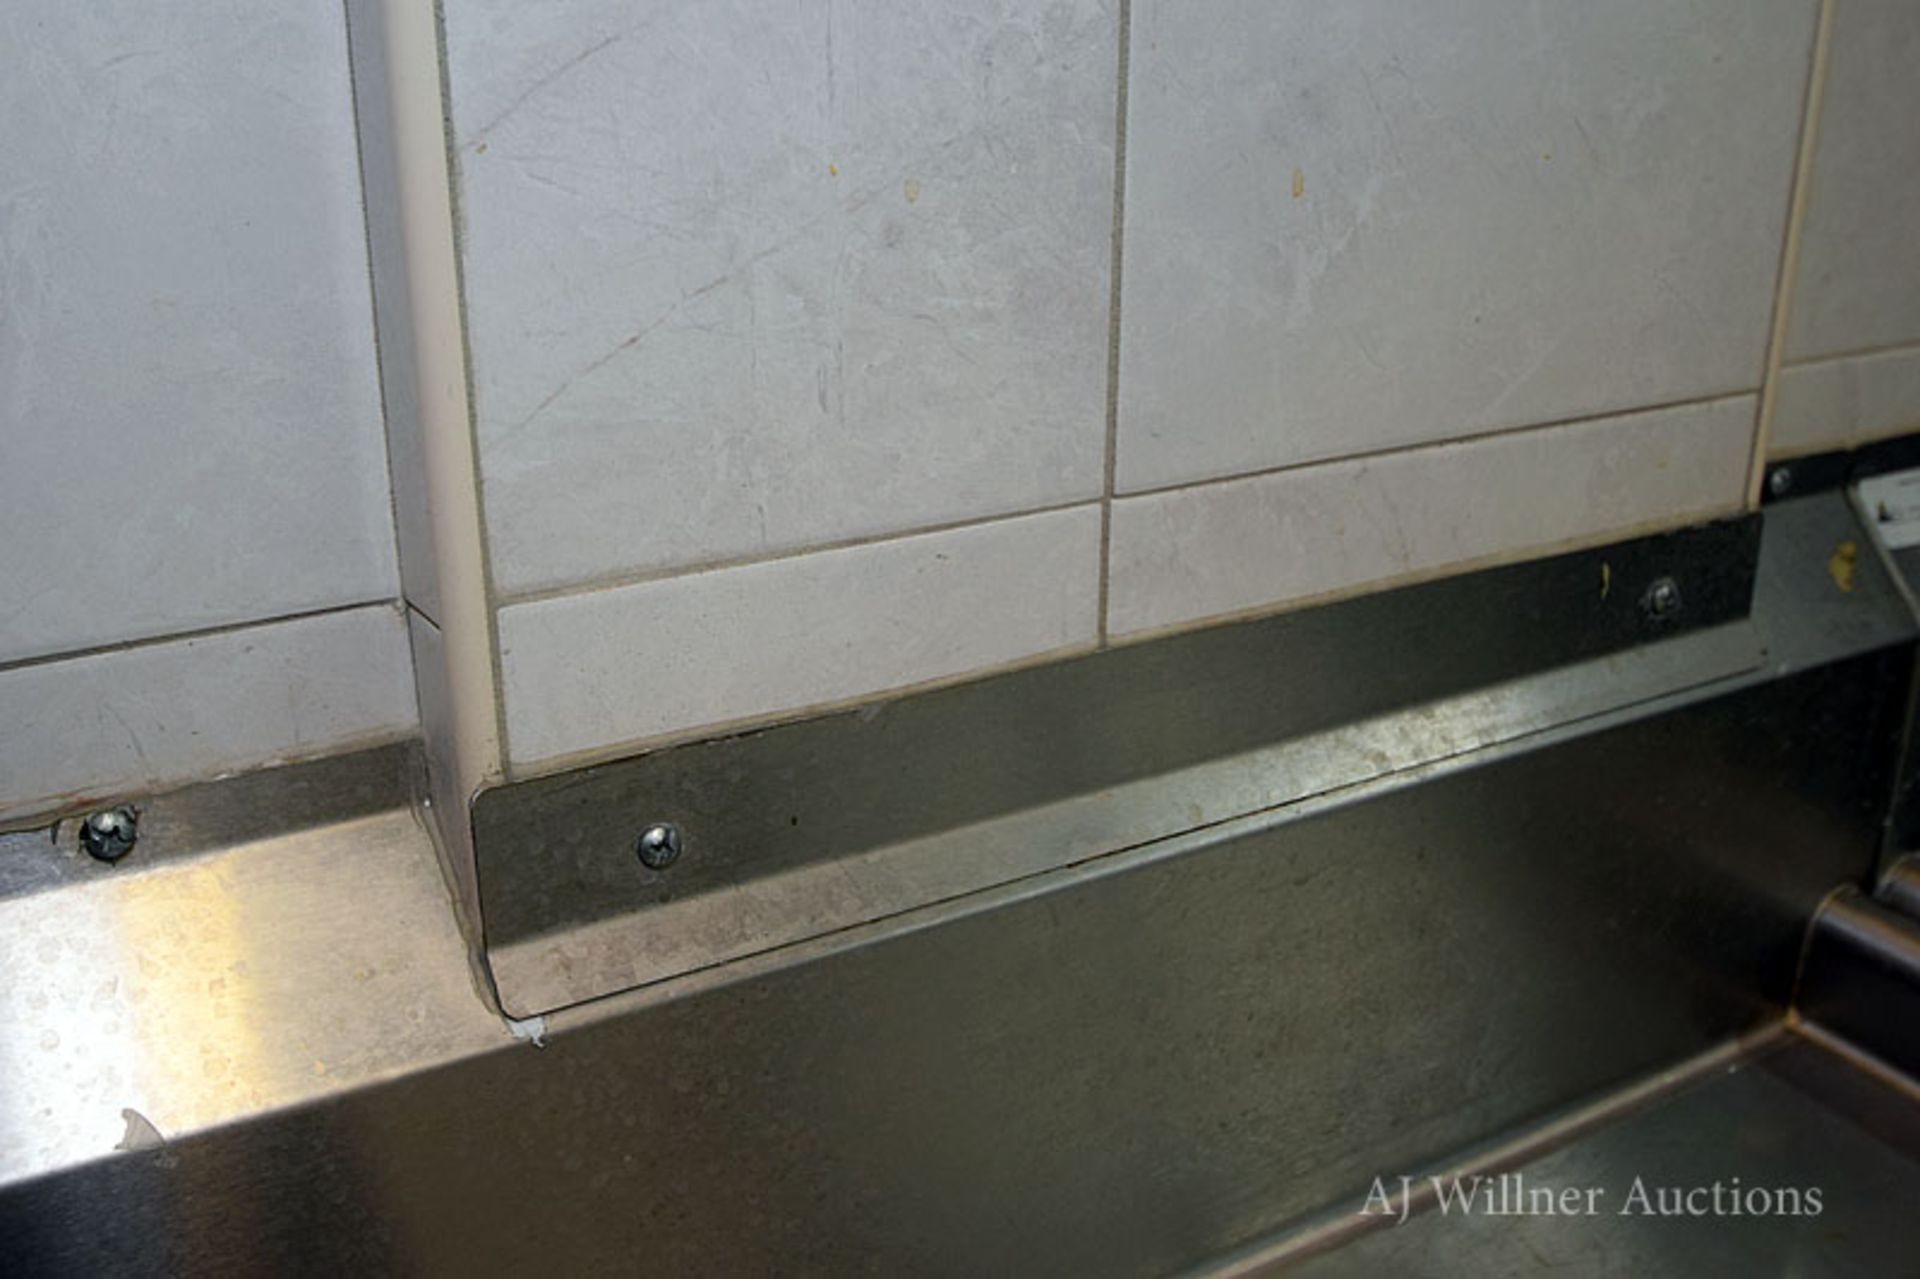 Triple Well Stainless Steel Sink w/ Right Side Drainboard & 2 Faucets - Image 2 of 2